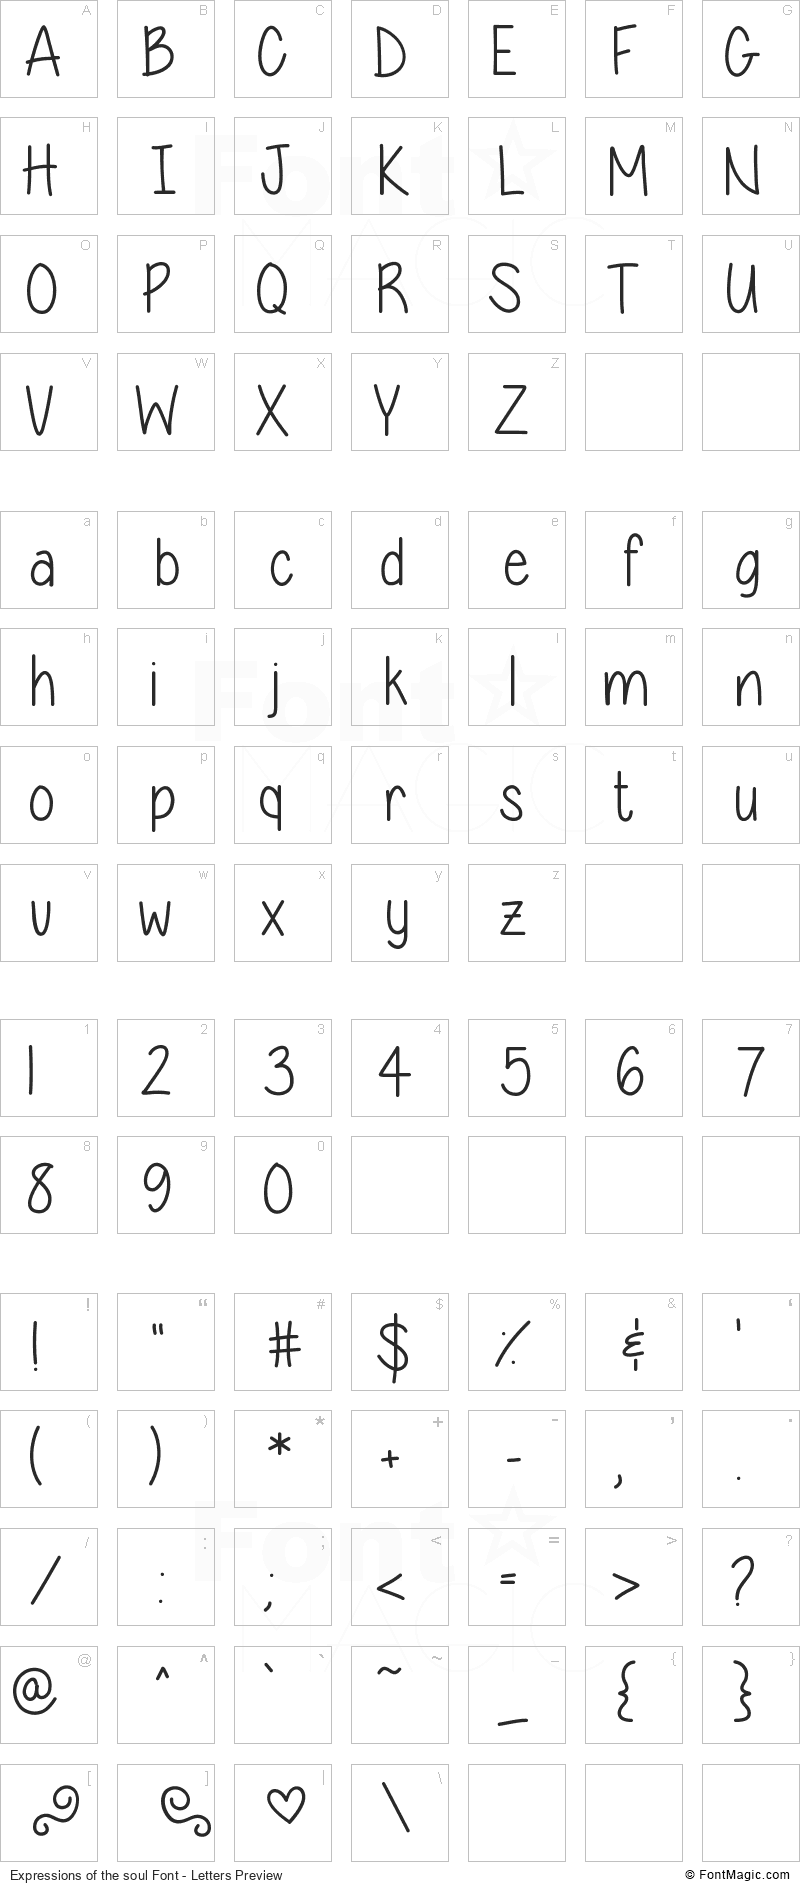 Expressions of the soul Font - All Latters Preview Chart